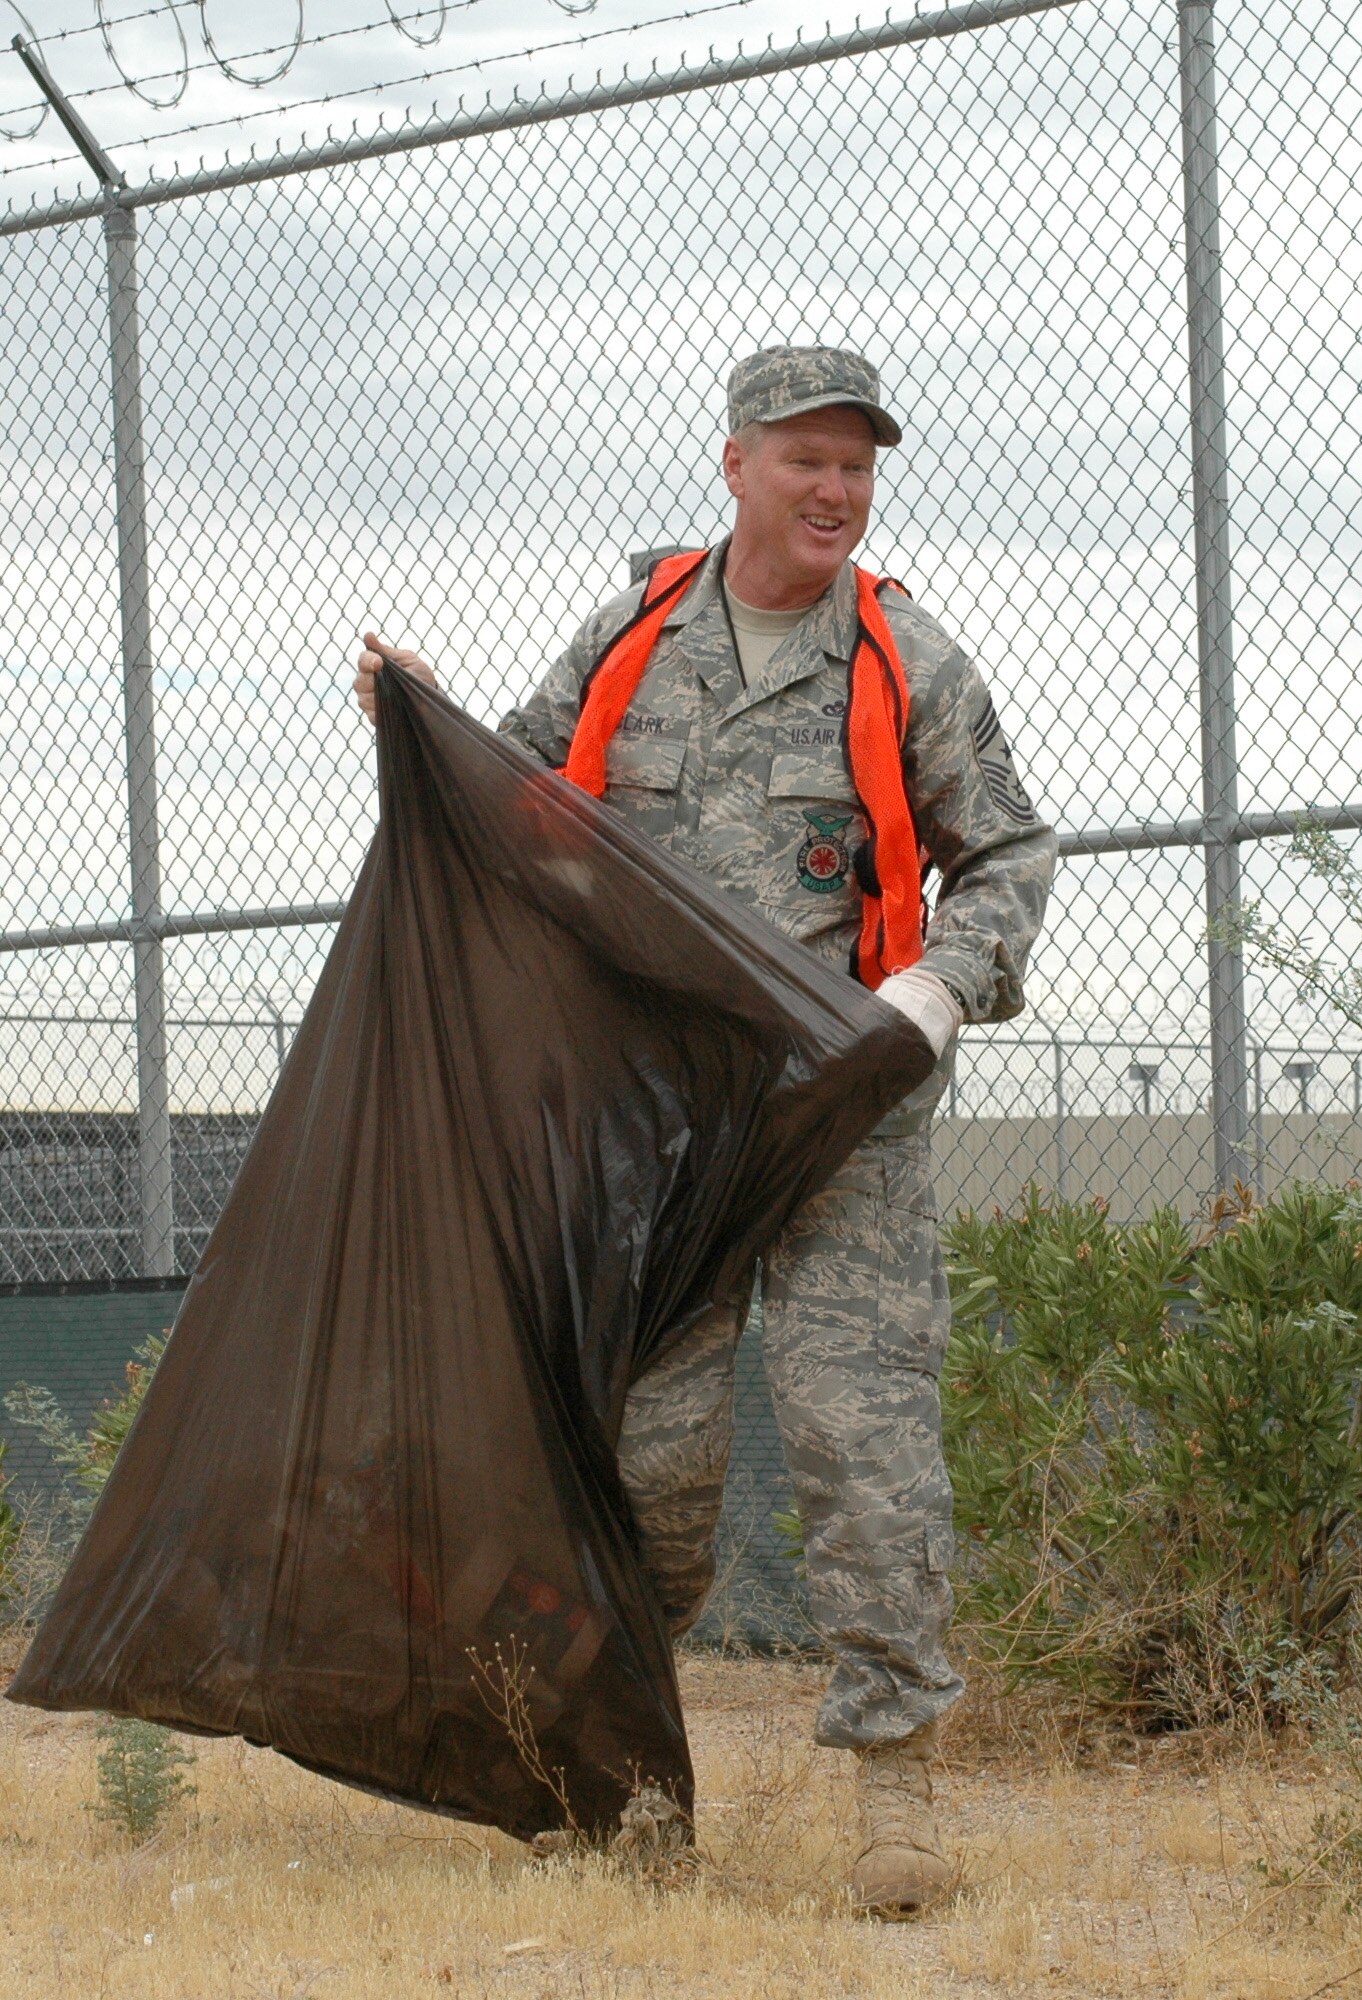 Command Chief Master Sgt. Shane Clark lends a hand to the 162nd Fighter Wing’s Junior Enlisted Council by picking up litter on Valencia Road. The council’s monthly “Adopt Valencia” cleanup effort ensures the base and surrounding community looks tidy. (Air Force by Master Sgt. Desiree Twombly)